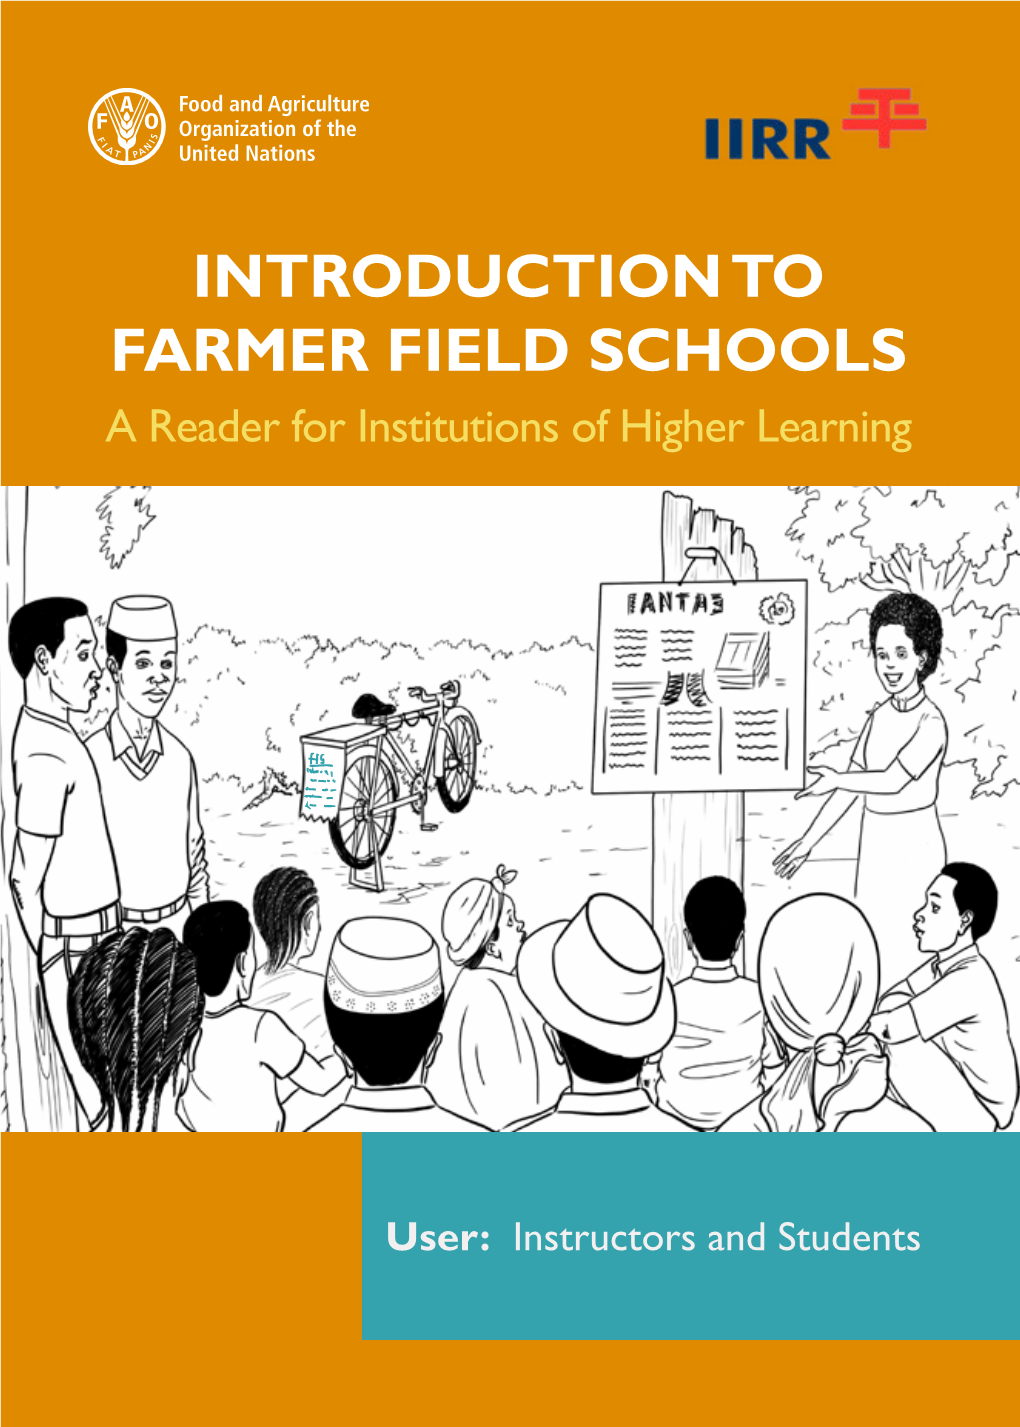 INTRODUCTION to FARMER FIELD SCHOOLS a Reader for Institutions of Higher Learning